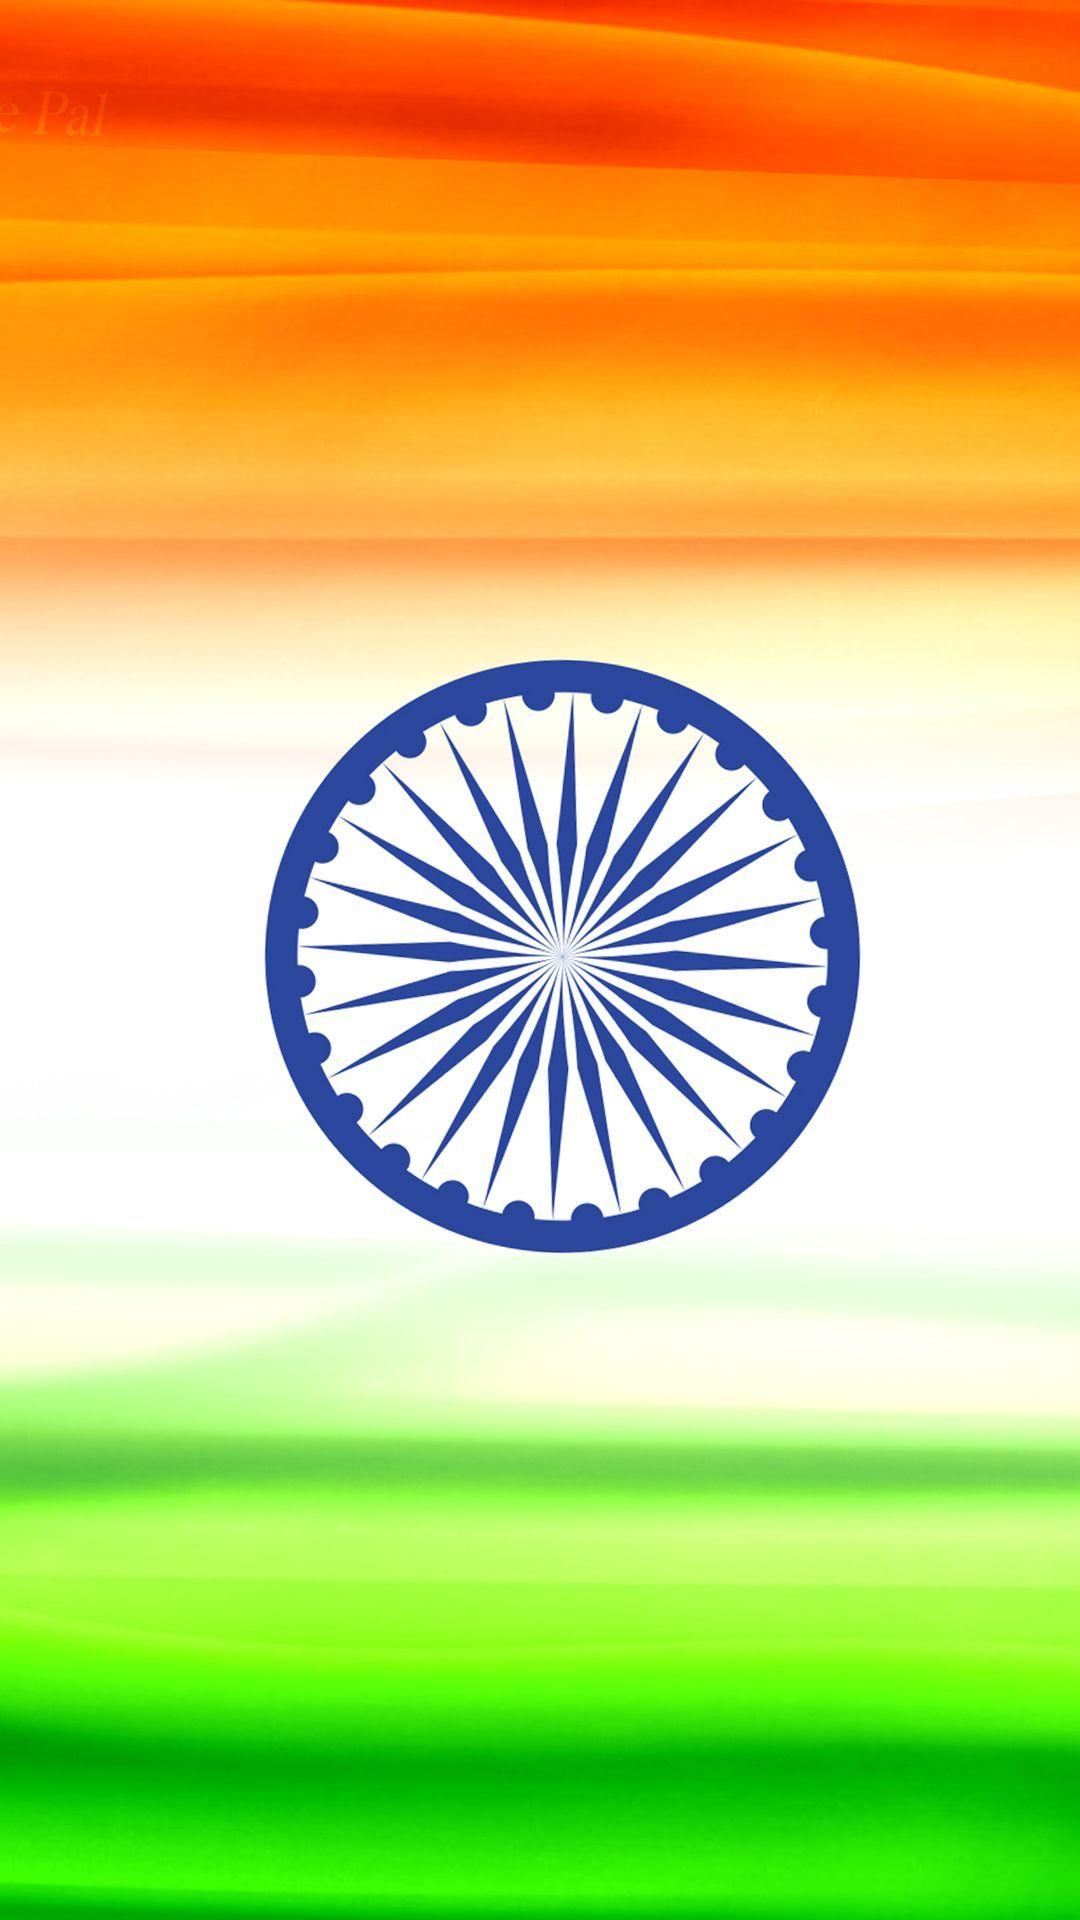 India Flag for Mobile Phone Wallpaper 10 of 17 to be an Indian Wallpaper. Wallpaper Download. High Resolution Wallpaper. Indian flag wallpaper, India flag, Indian flag